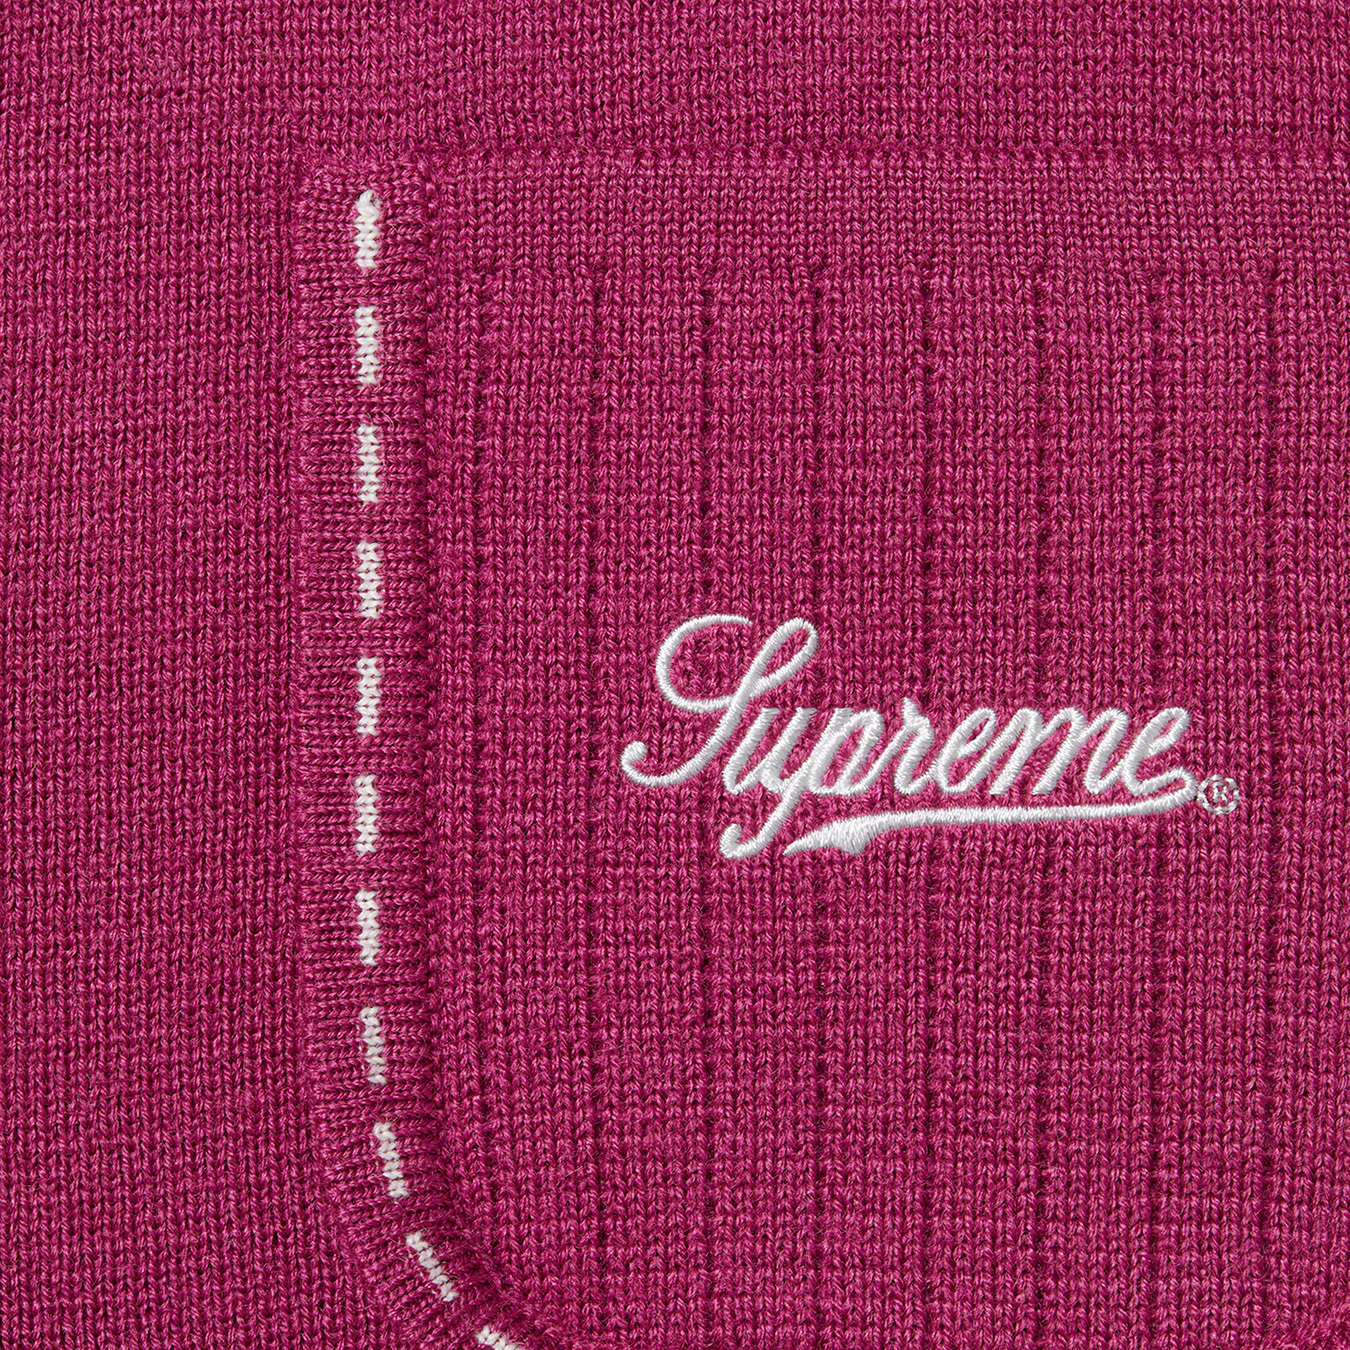 Contrast Stitch Button Up Sweater - fall winter 2022 - Supreme